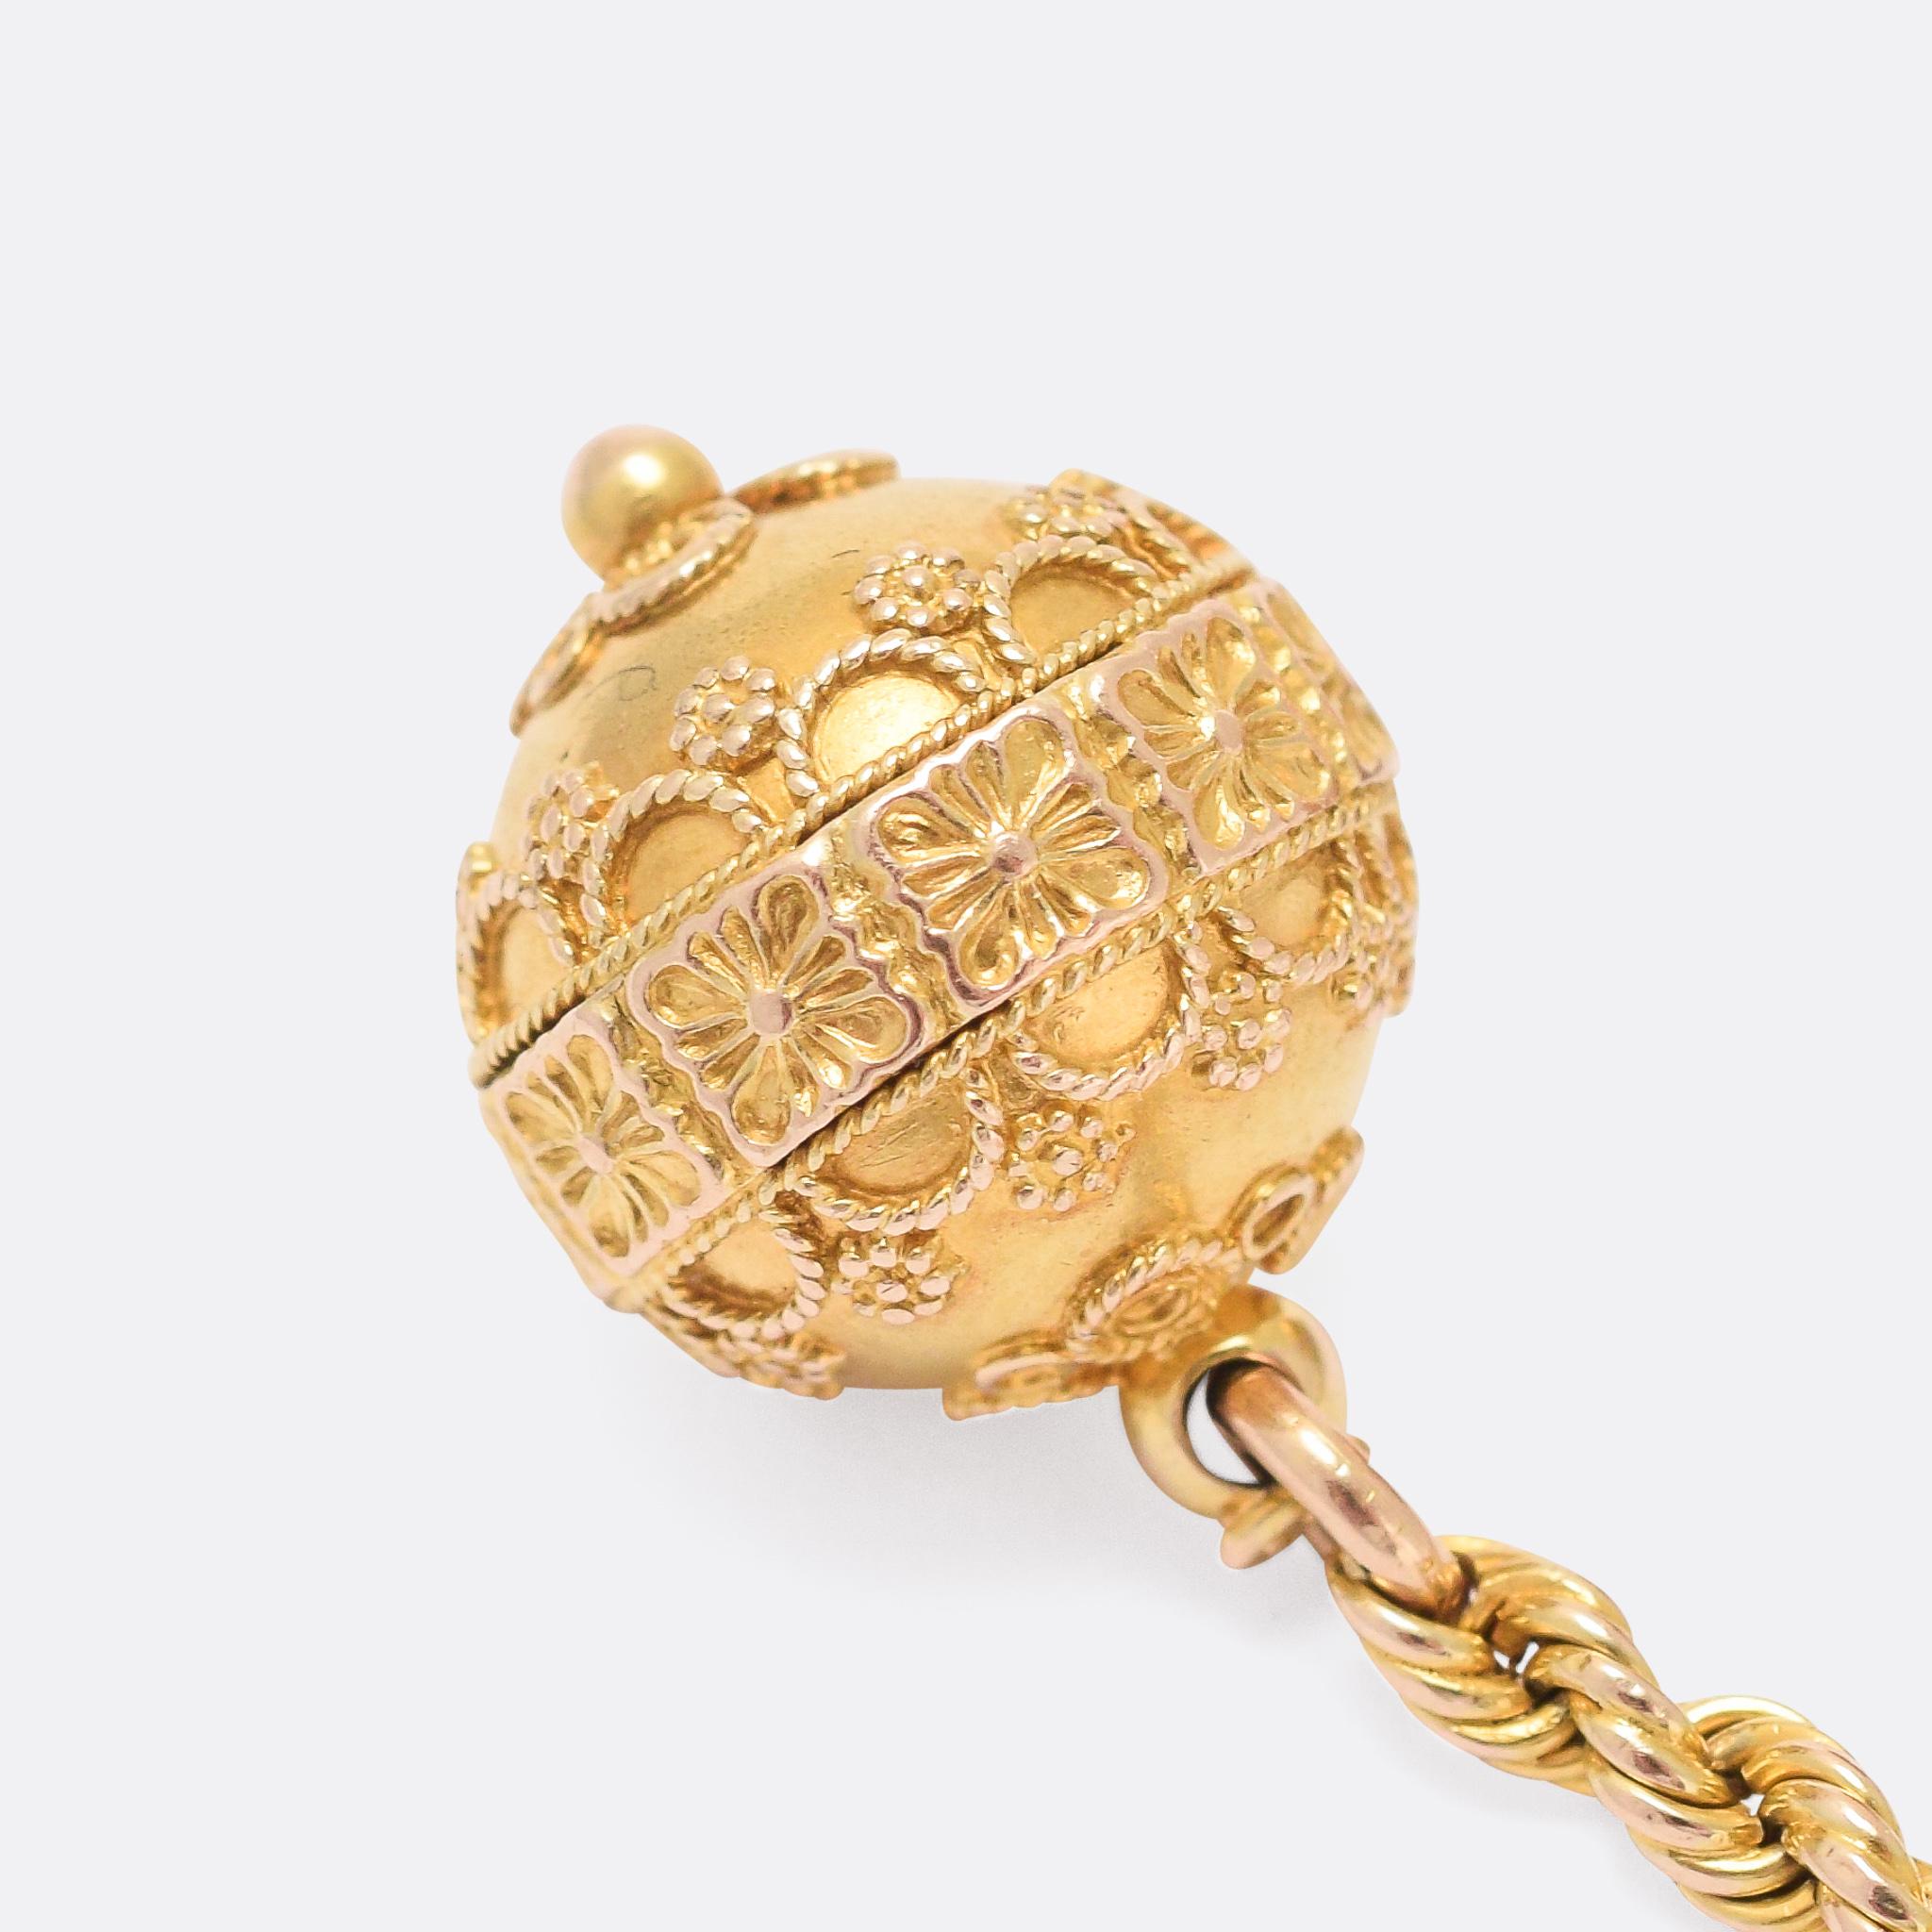 A cool antique watch fob featuring two golden orbs decorated in the Etruscan Revival style and dangling on rope-twist chains from a swivel clasp. Modelled in 15 karat gold throughout, the orbs have applied gold ropework and granulation motifs. There